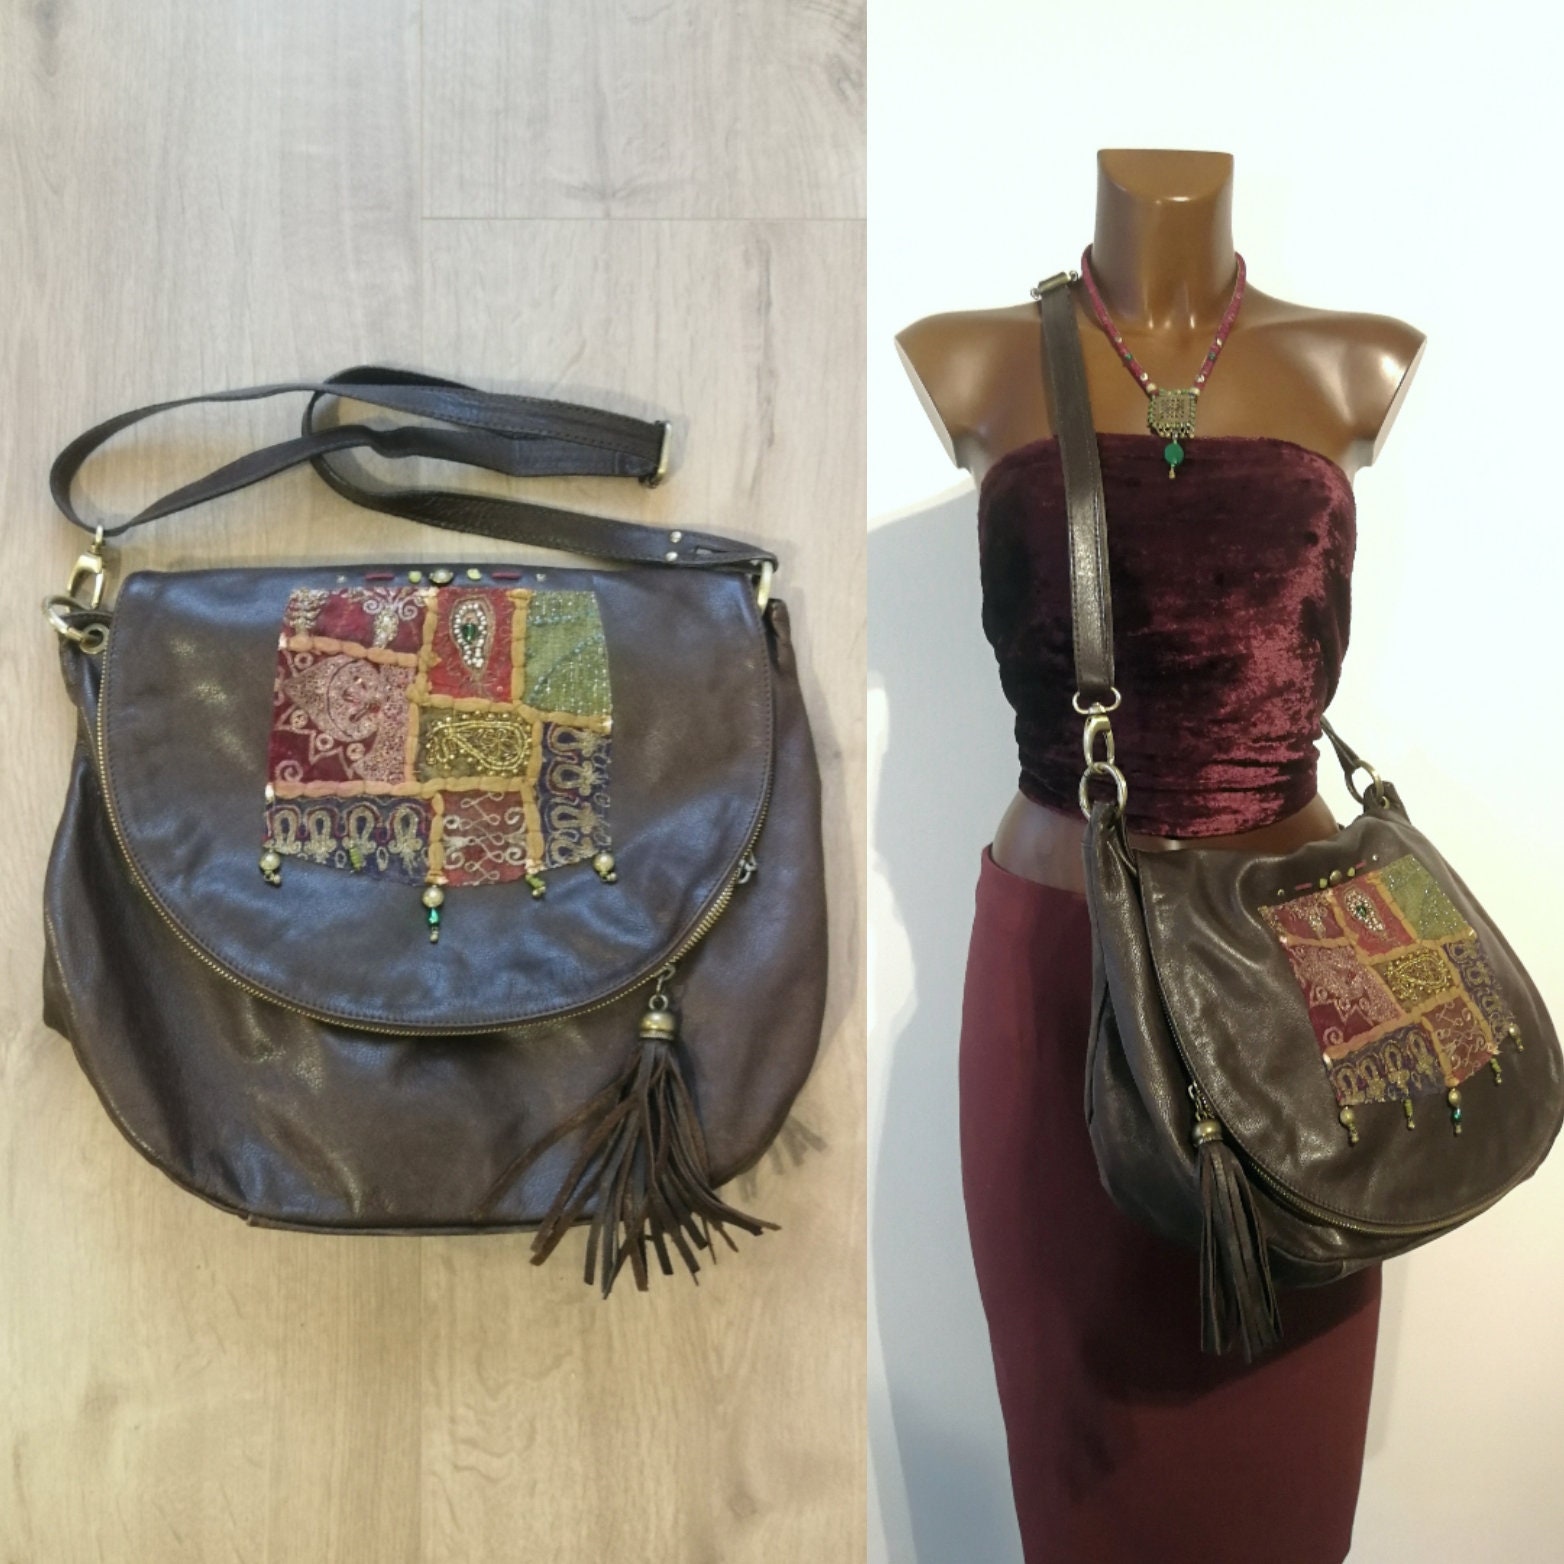 Bohemian Chic Ethnic Bag in Soft Italian Leather Vintage Style